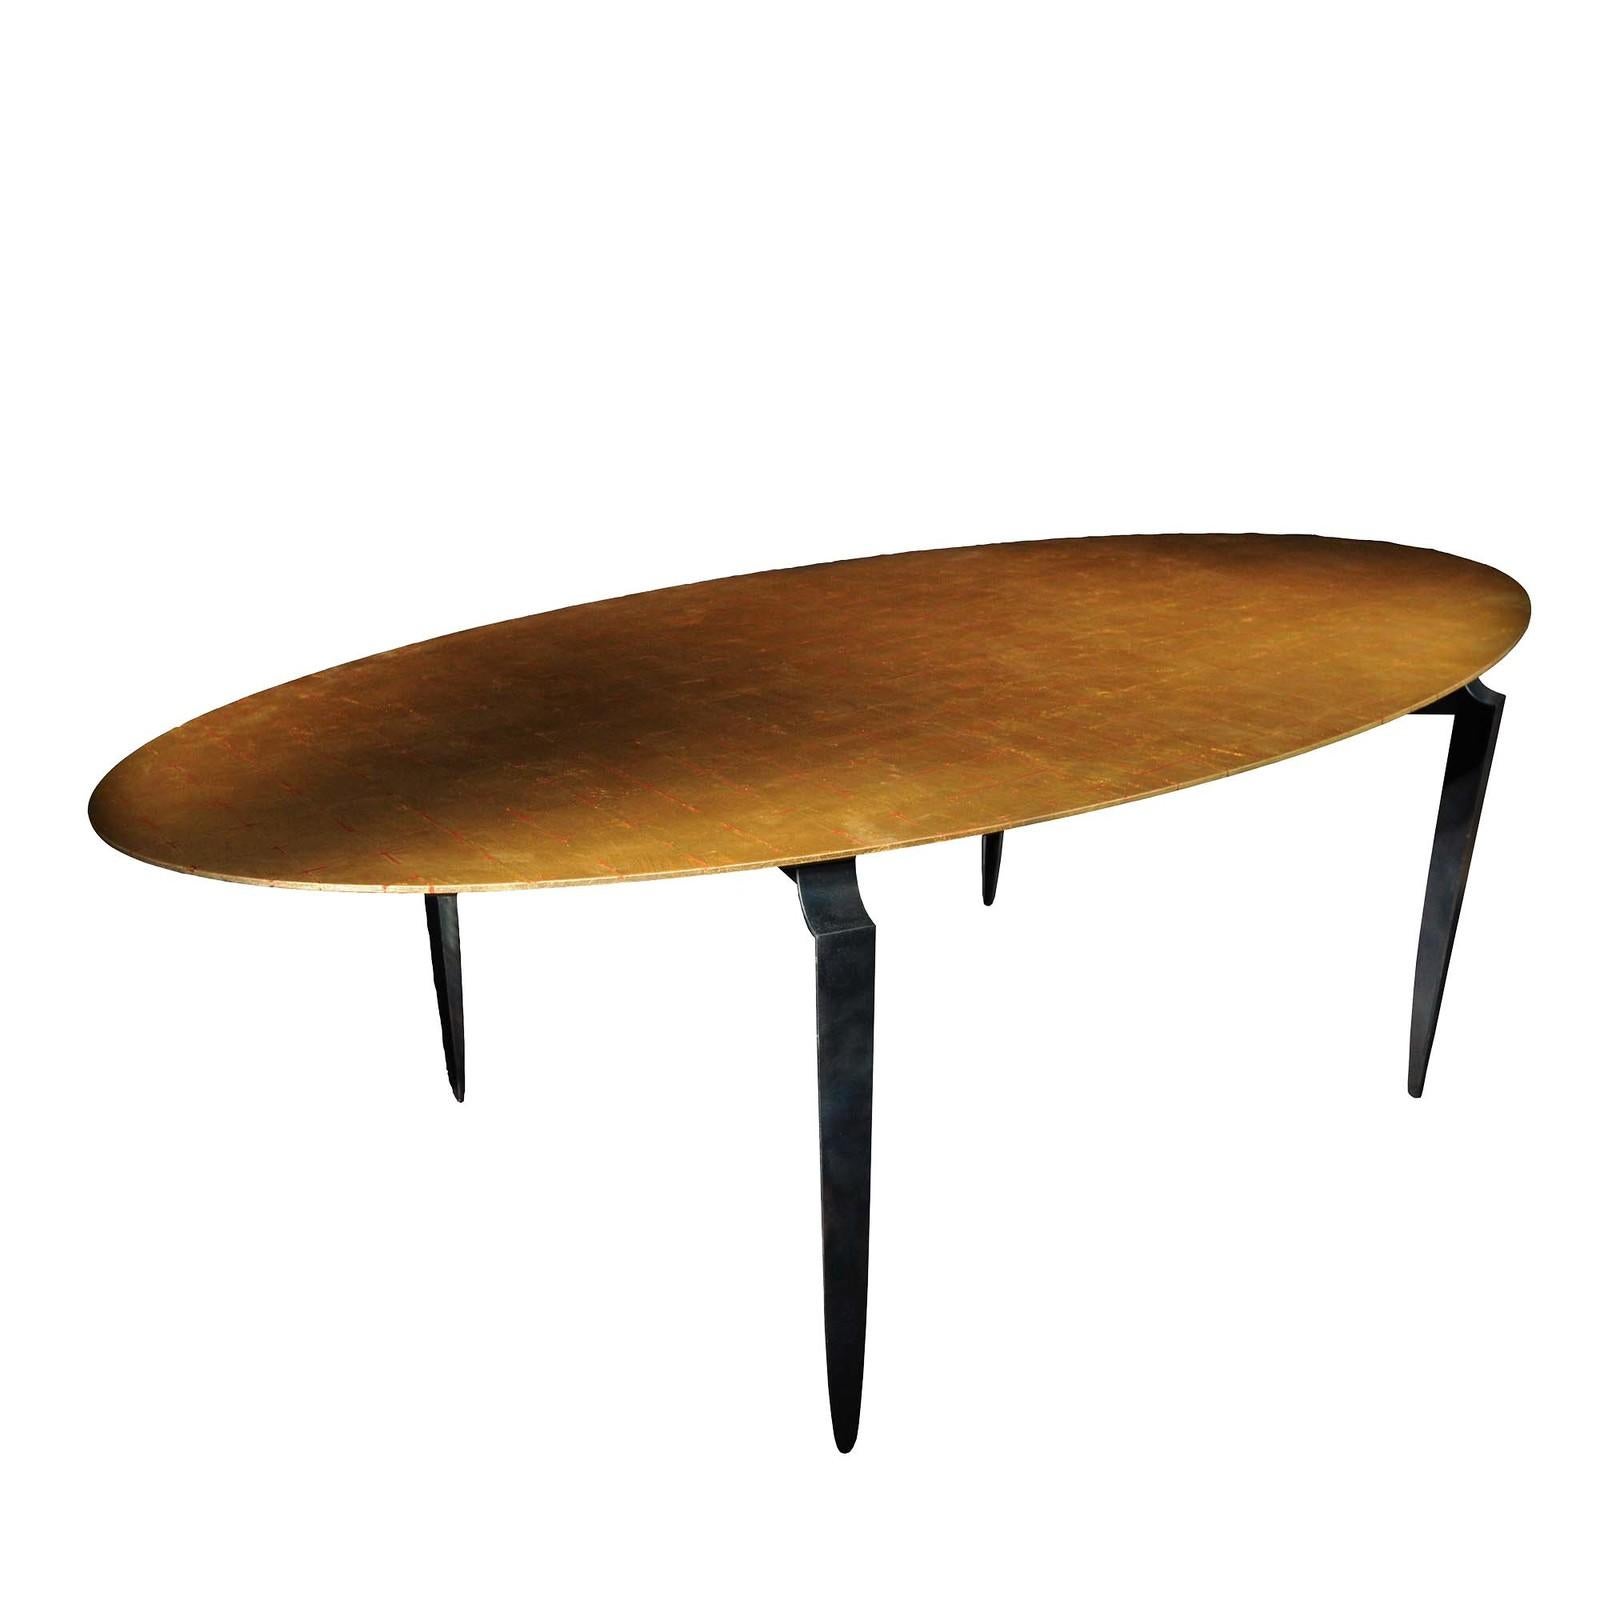 Midcentury and industrial inspiration merge in this stunning dining table that showcases an elliptical oak top entirely finished in gold leaf. A sophisticated choice for a modern dining room, the sturdy metal legs have been given a black powder